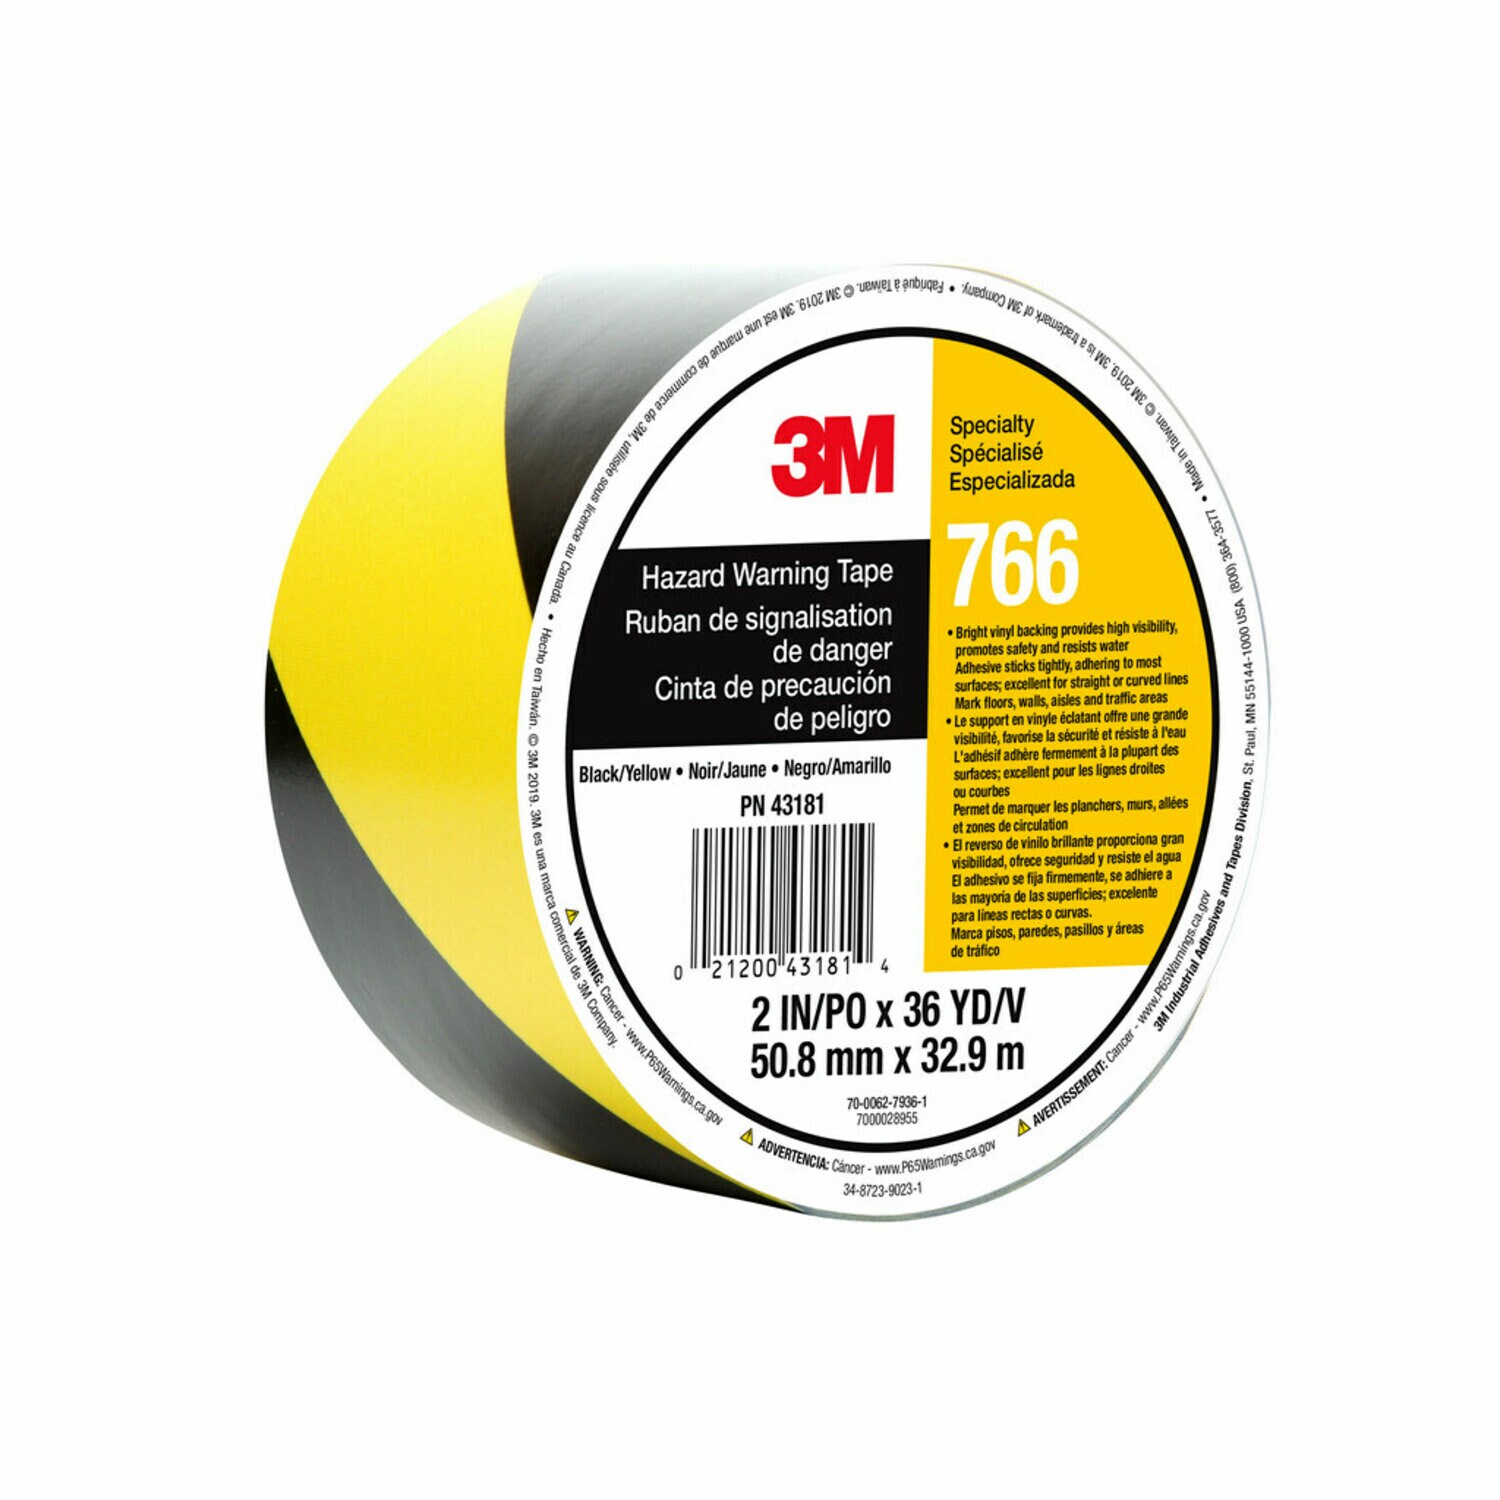 7000028955 - 3M Safety Stripe Warning Tape 766, Black/Yellow, 2 in x 36 yd, 5 mil, 24 Roll/Case, Individually Wrapped Conveniently Packaged